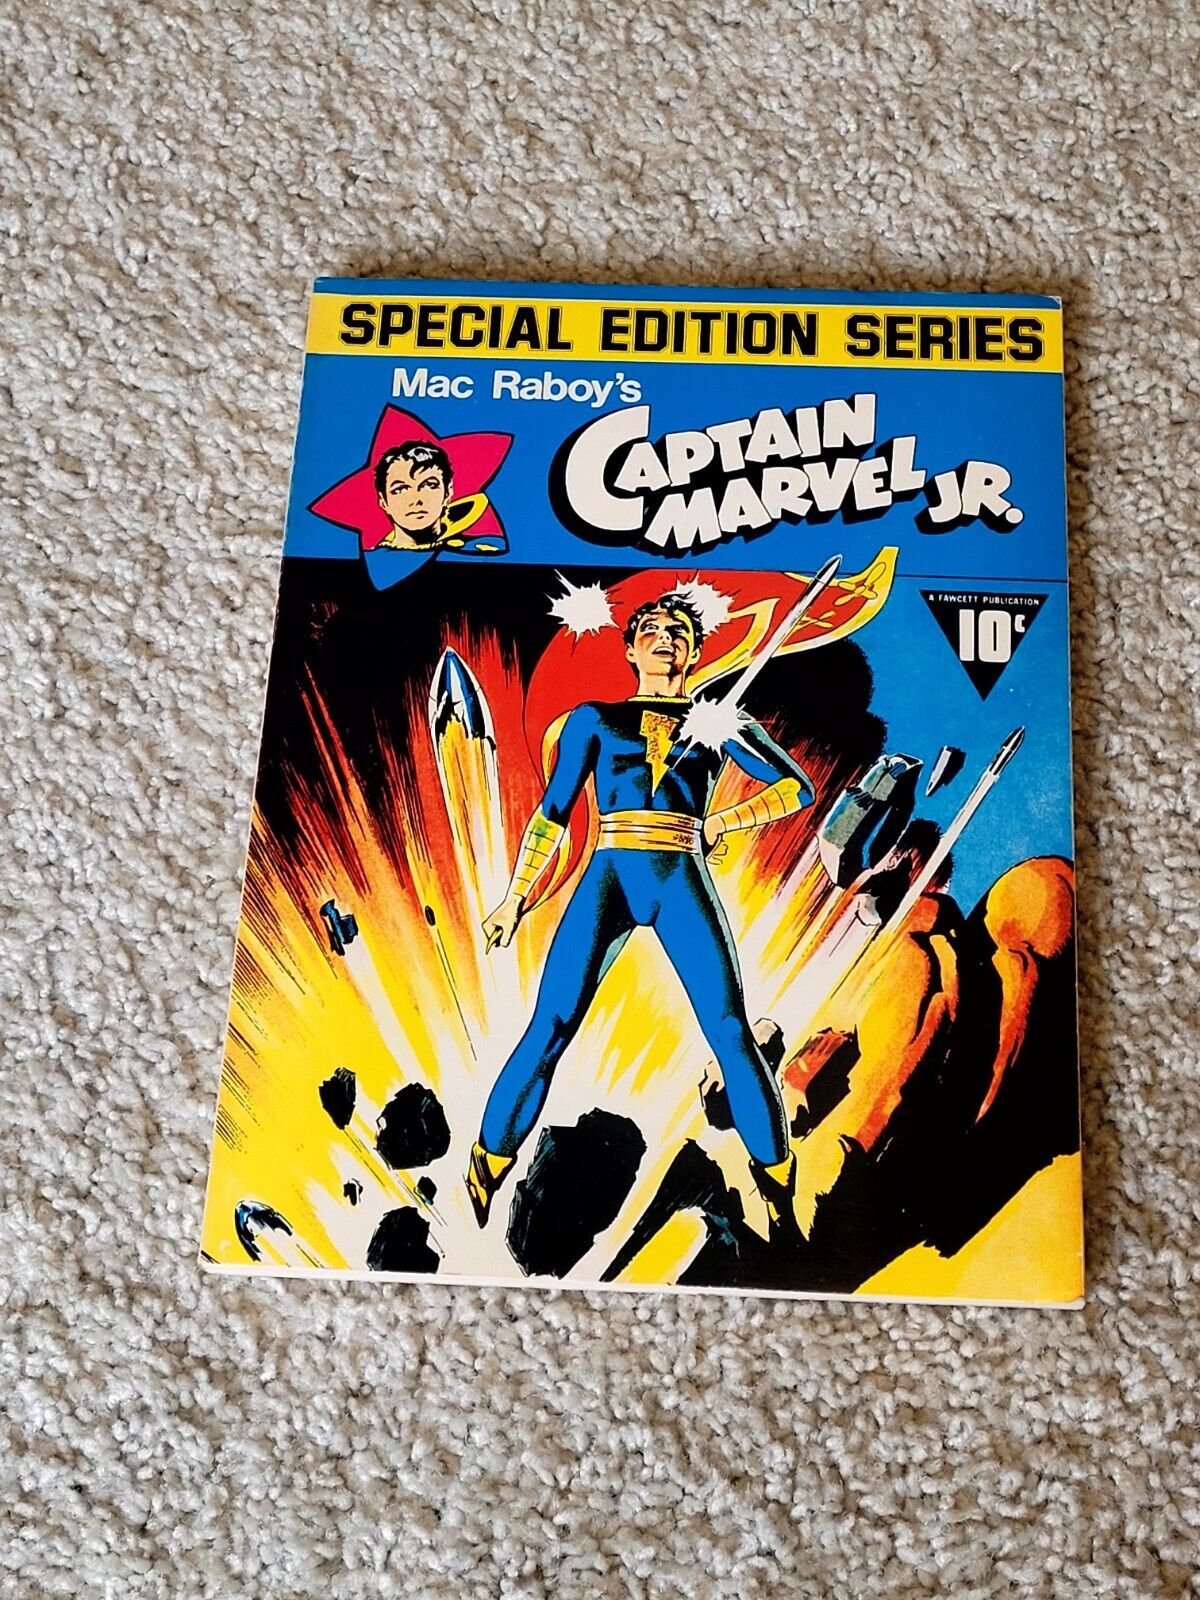 MAC RABOY\'S CAPTAIN MARVEL JR SPECIAL EDITION SERIES SOFTCOVER 1975